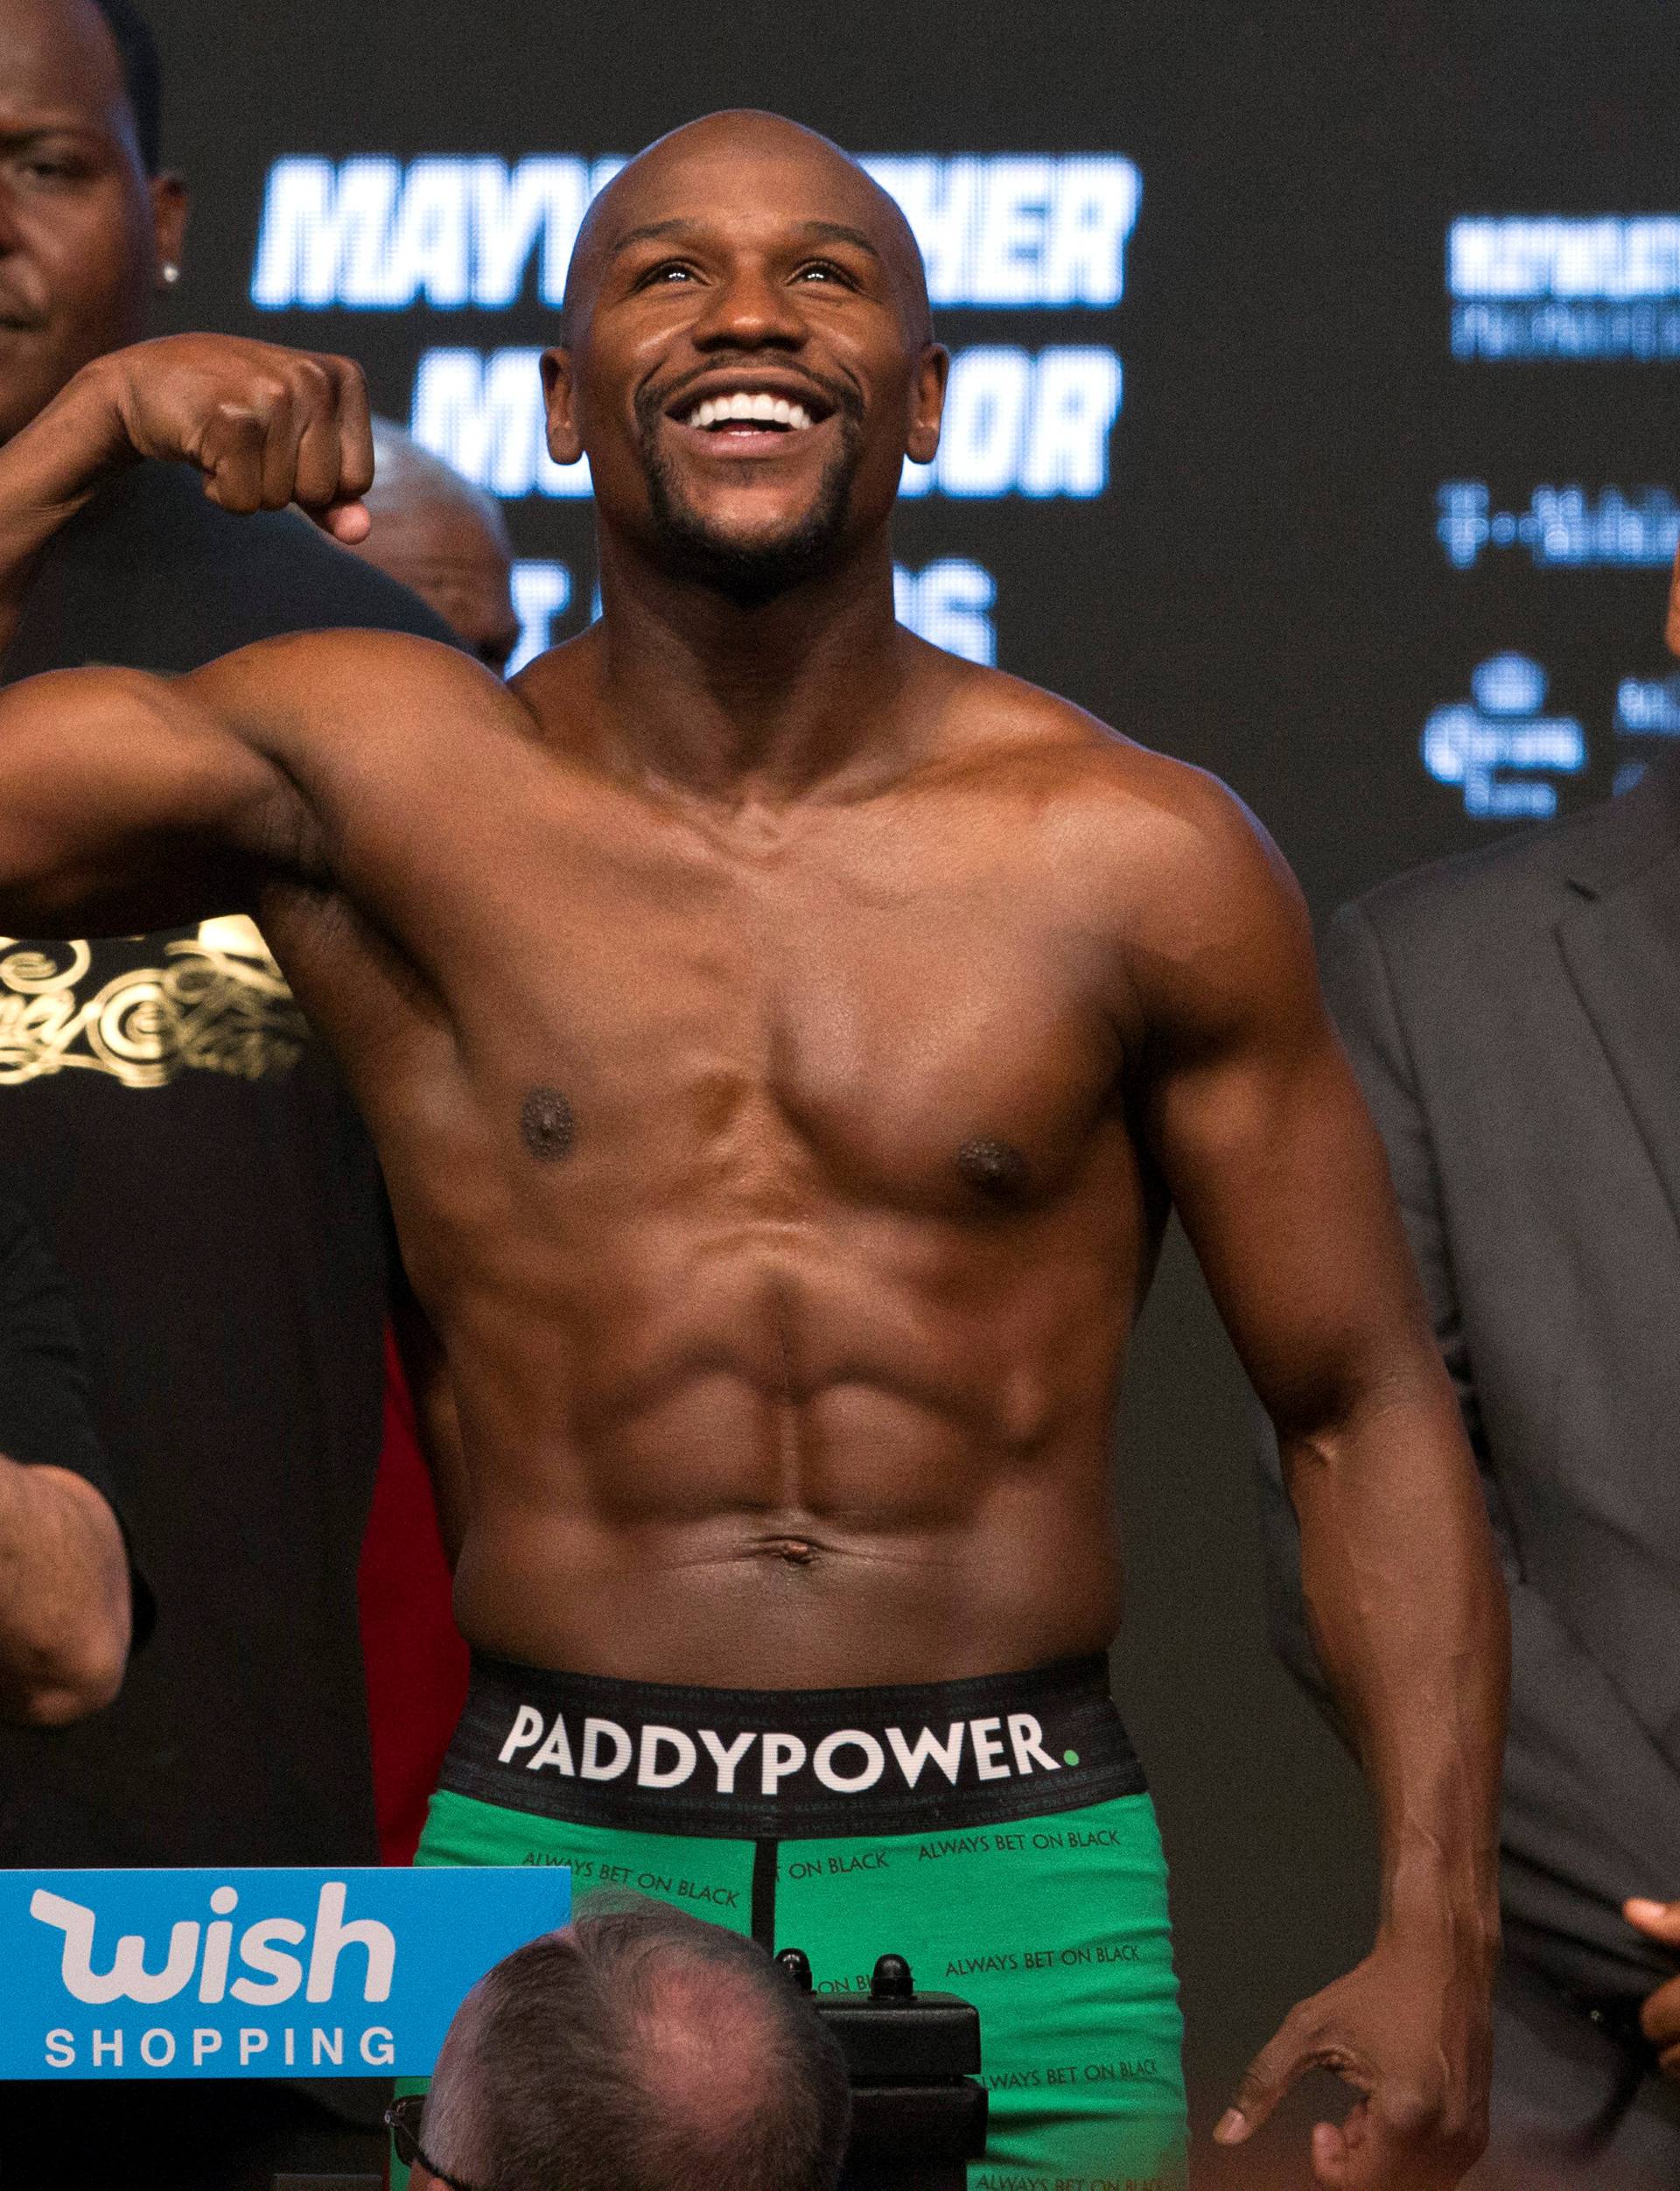 Undefeated boxer Floyd Mayweather Jr. of the U.S. poses in the scale during his official weigh-in at T-Mobile Arena in Las Vegas